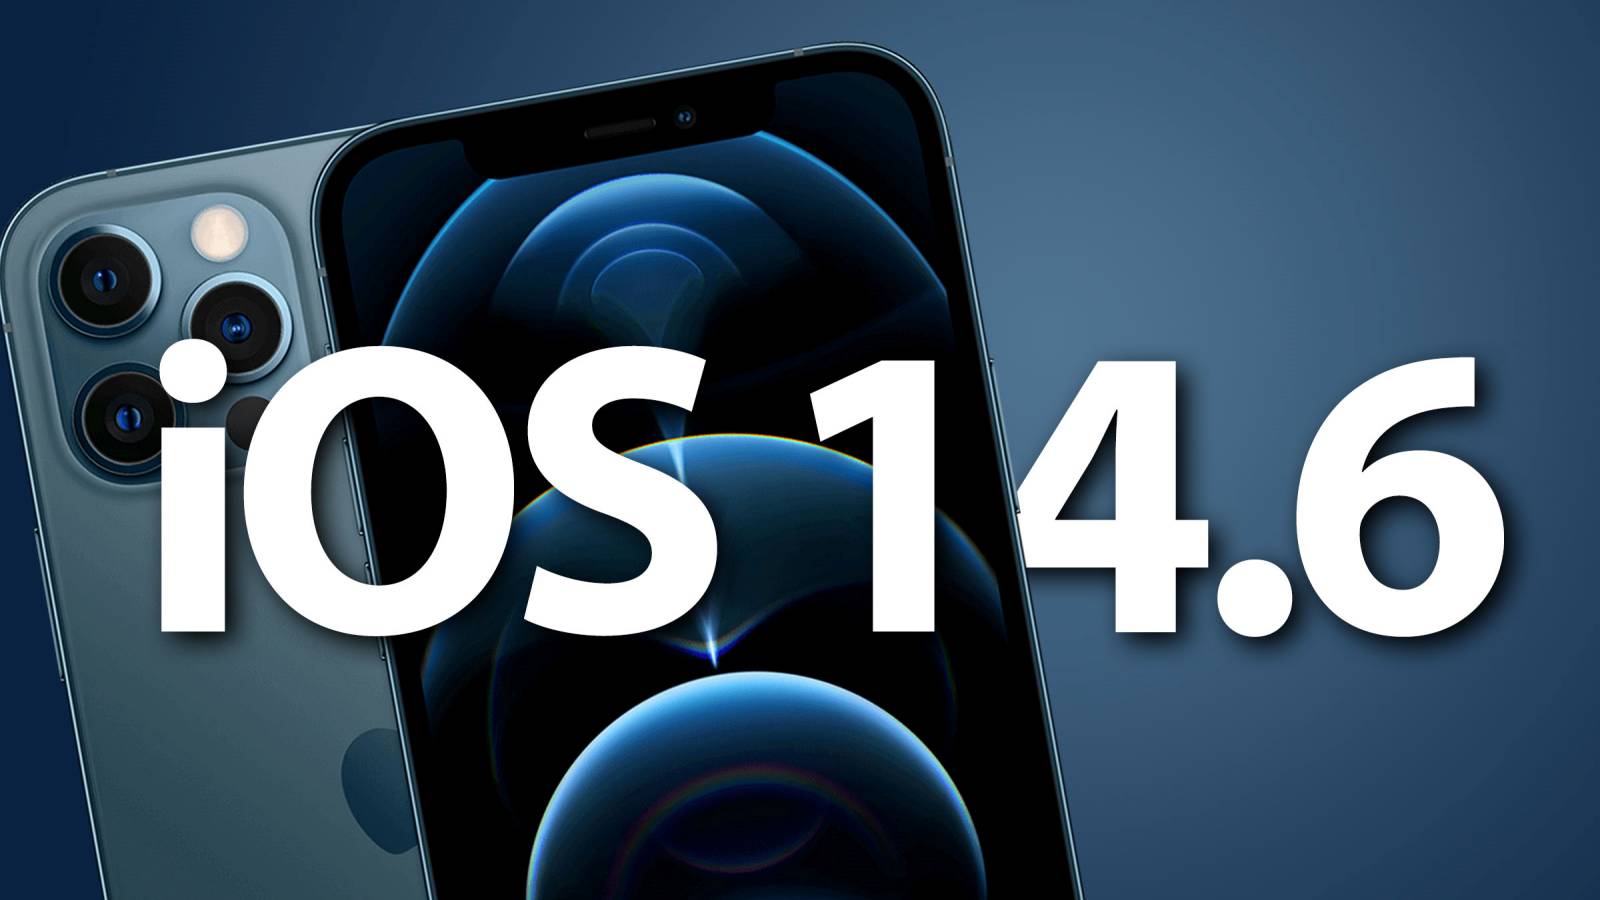 iOS 14.6 has been released, List of News for iPhone and iPad